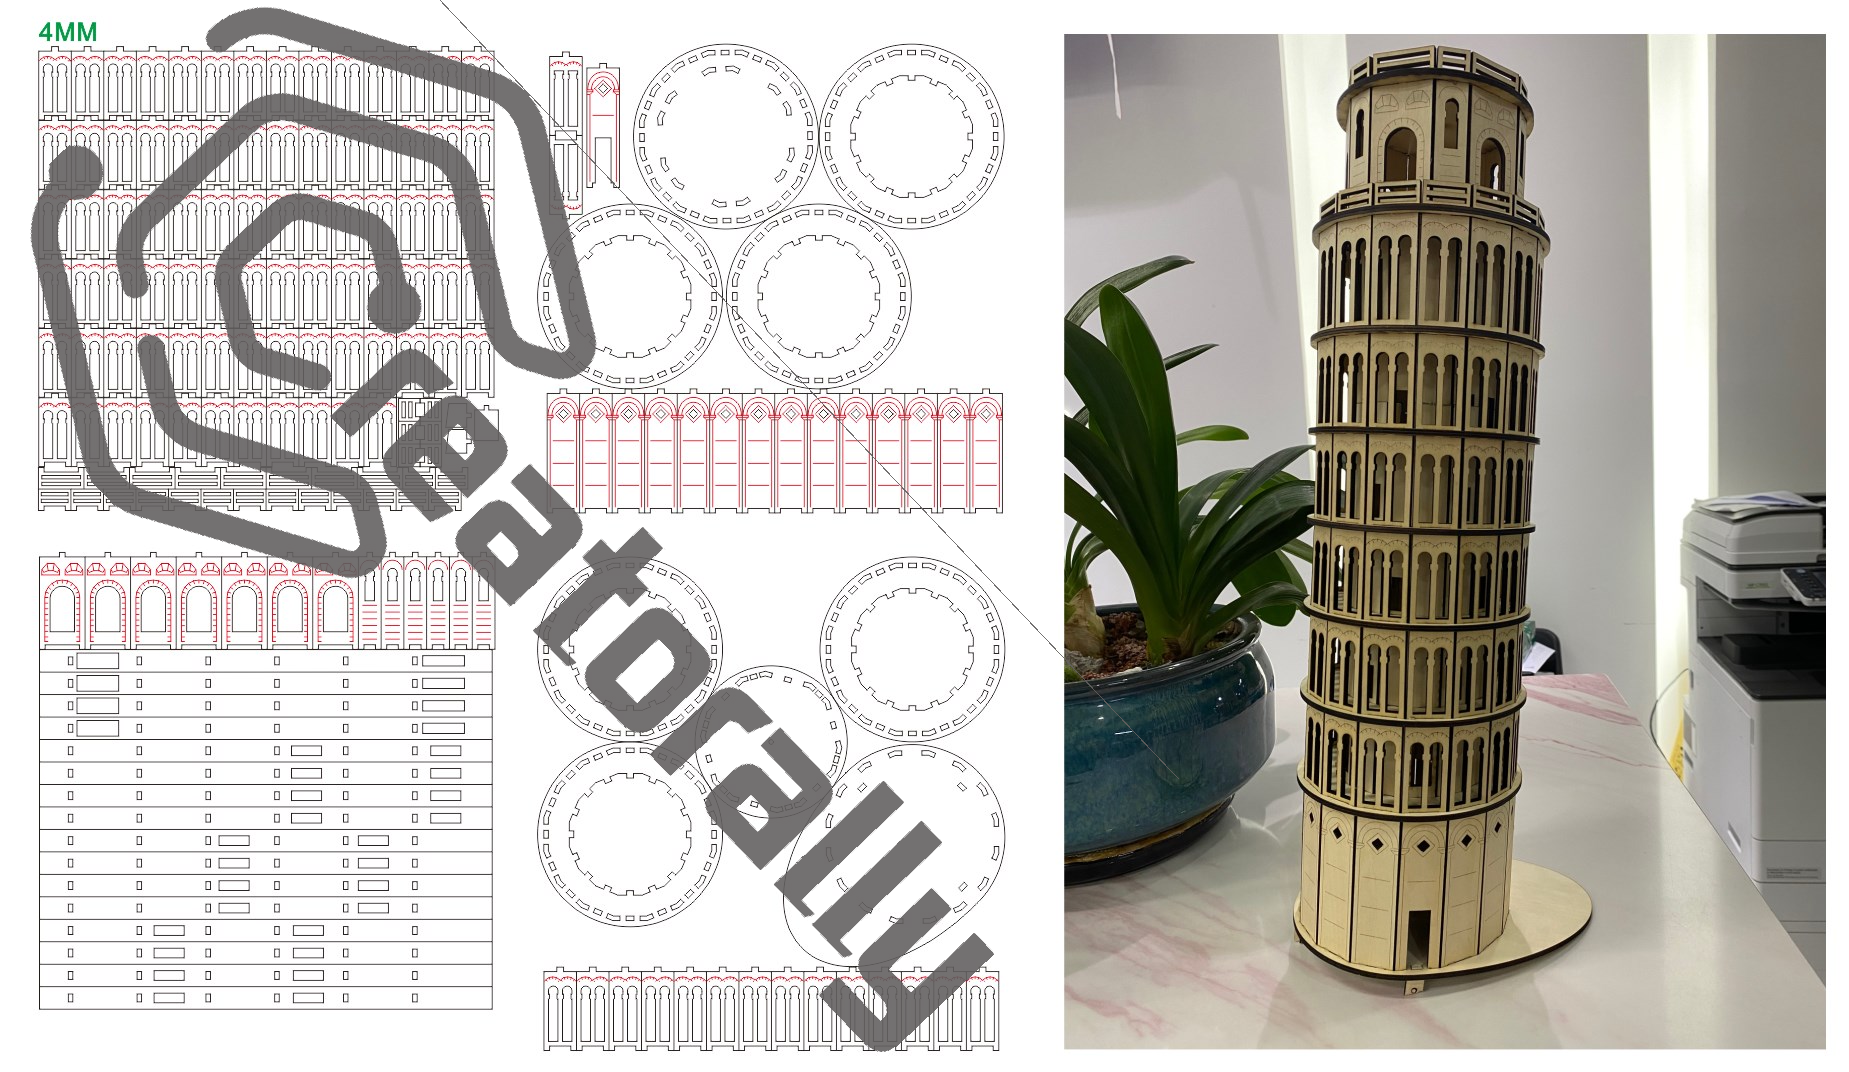 Leaning Tower of Pisa 3D Puzzle Laser Cutting File - Build Your Own by Creatorally